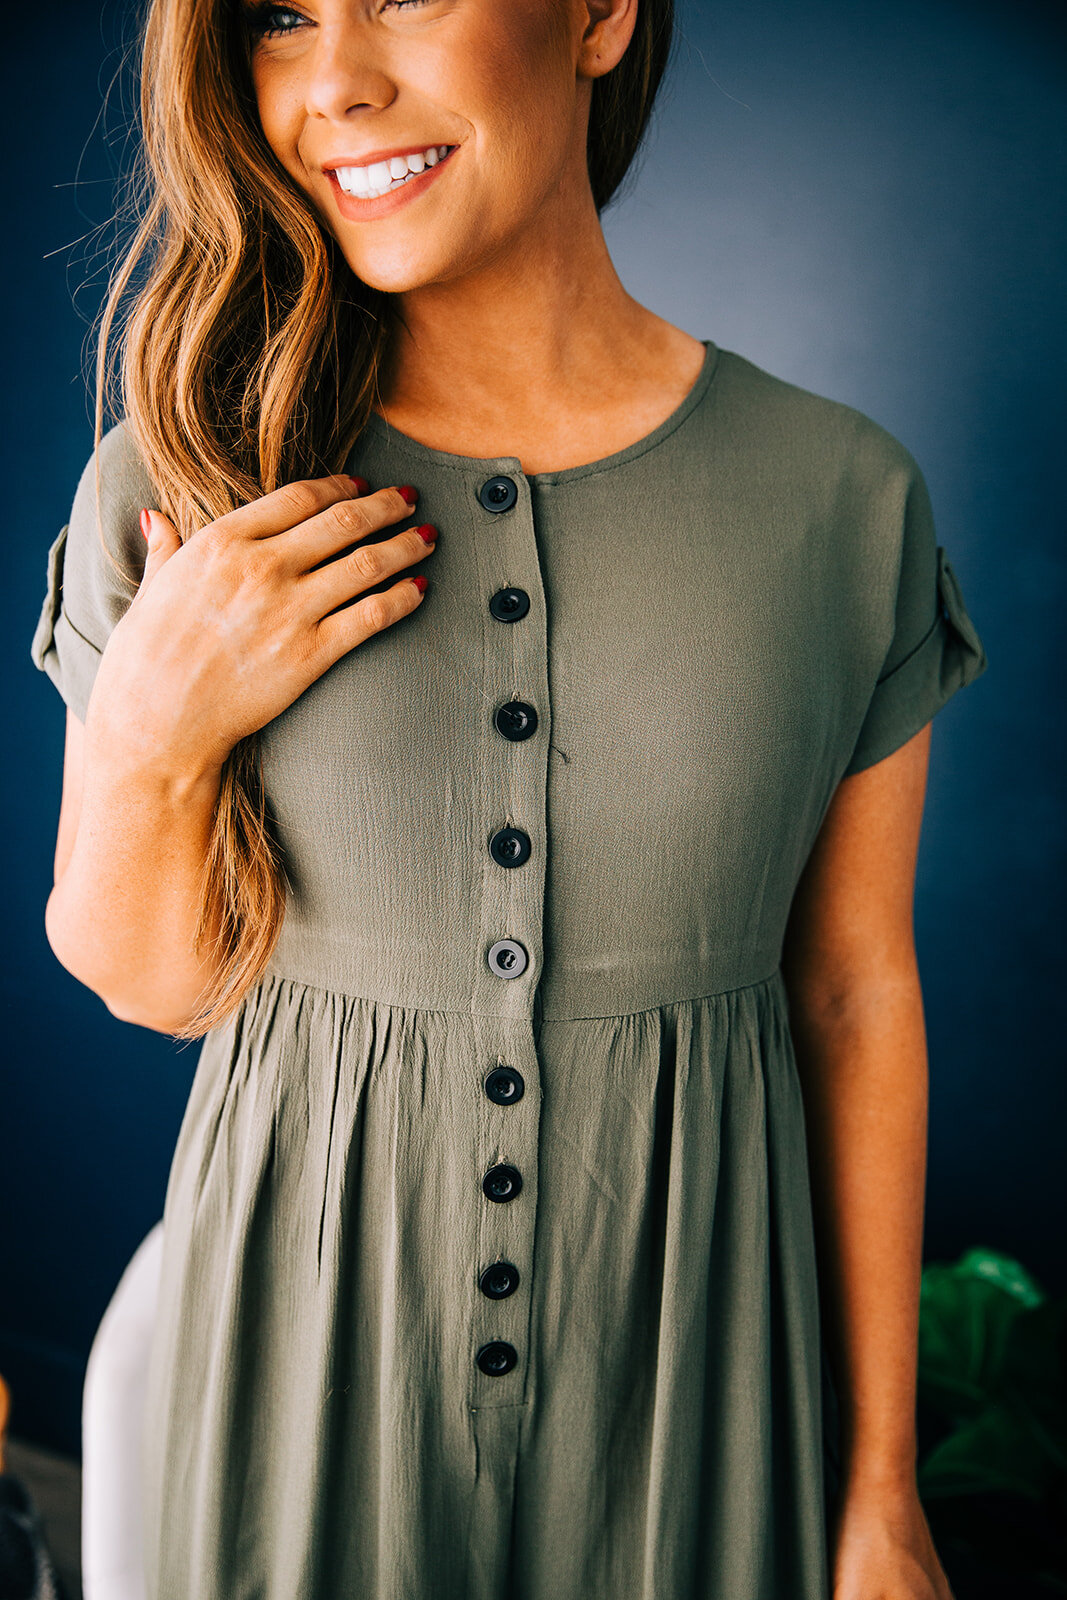  button up baby doll top short sleeve grey fashion top available online at copper lane commercial photography by bella alder photography product photos new inventory at station studio in logan utah online clothing fashion boutique selling women’s clo